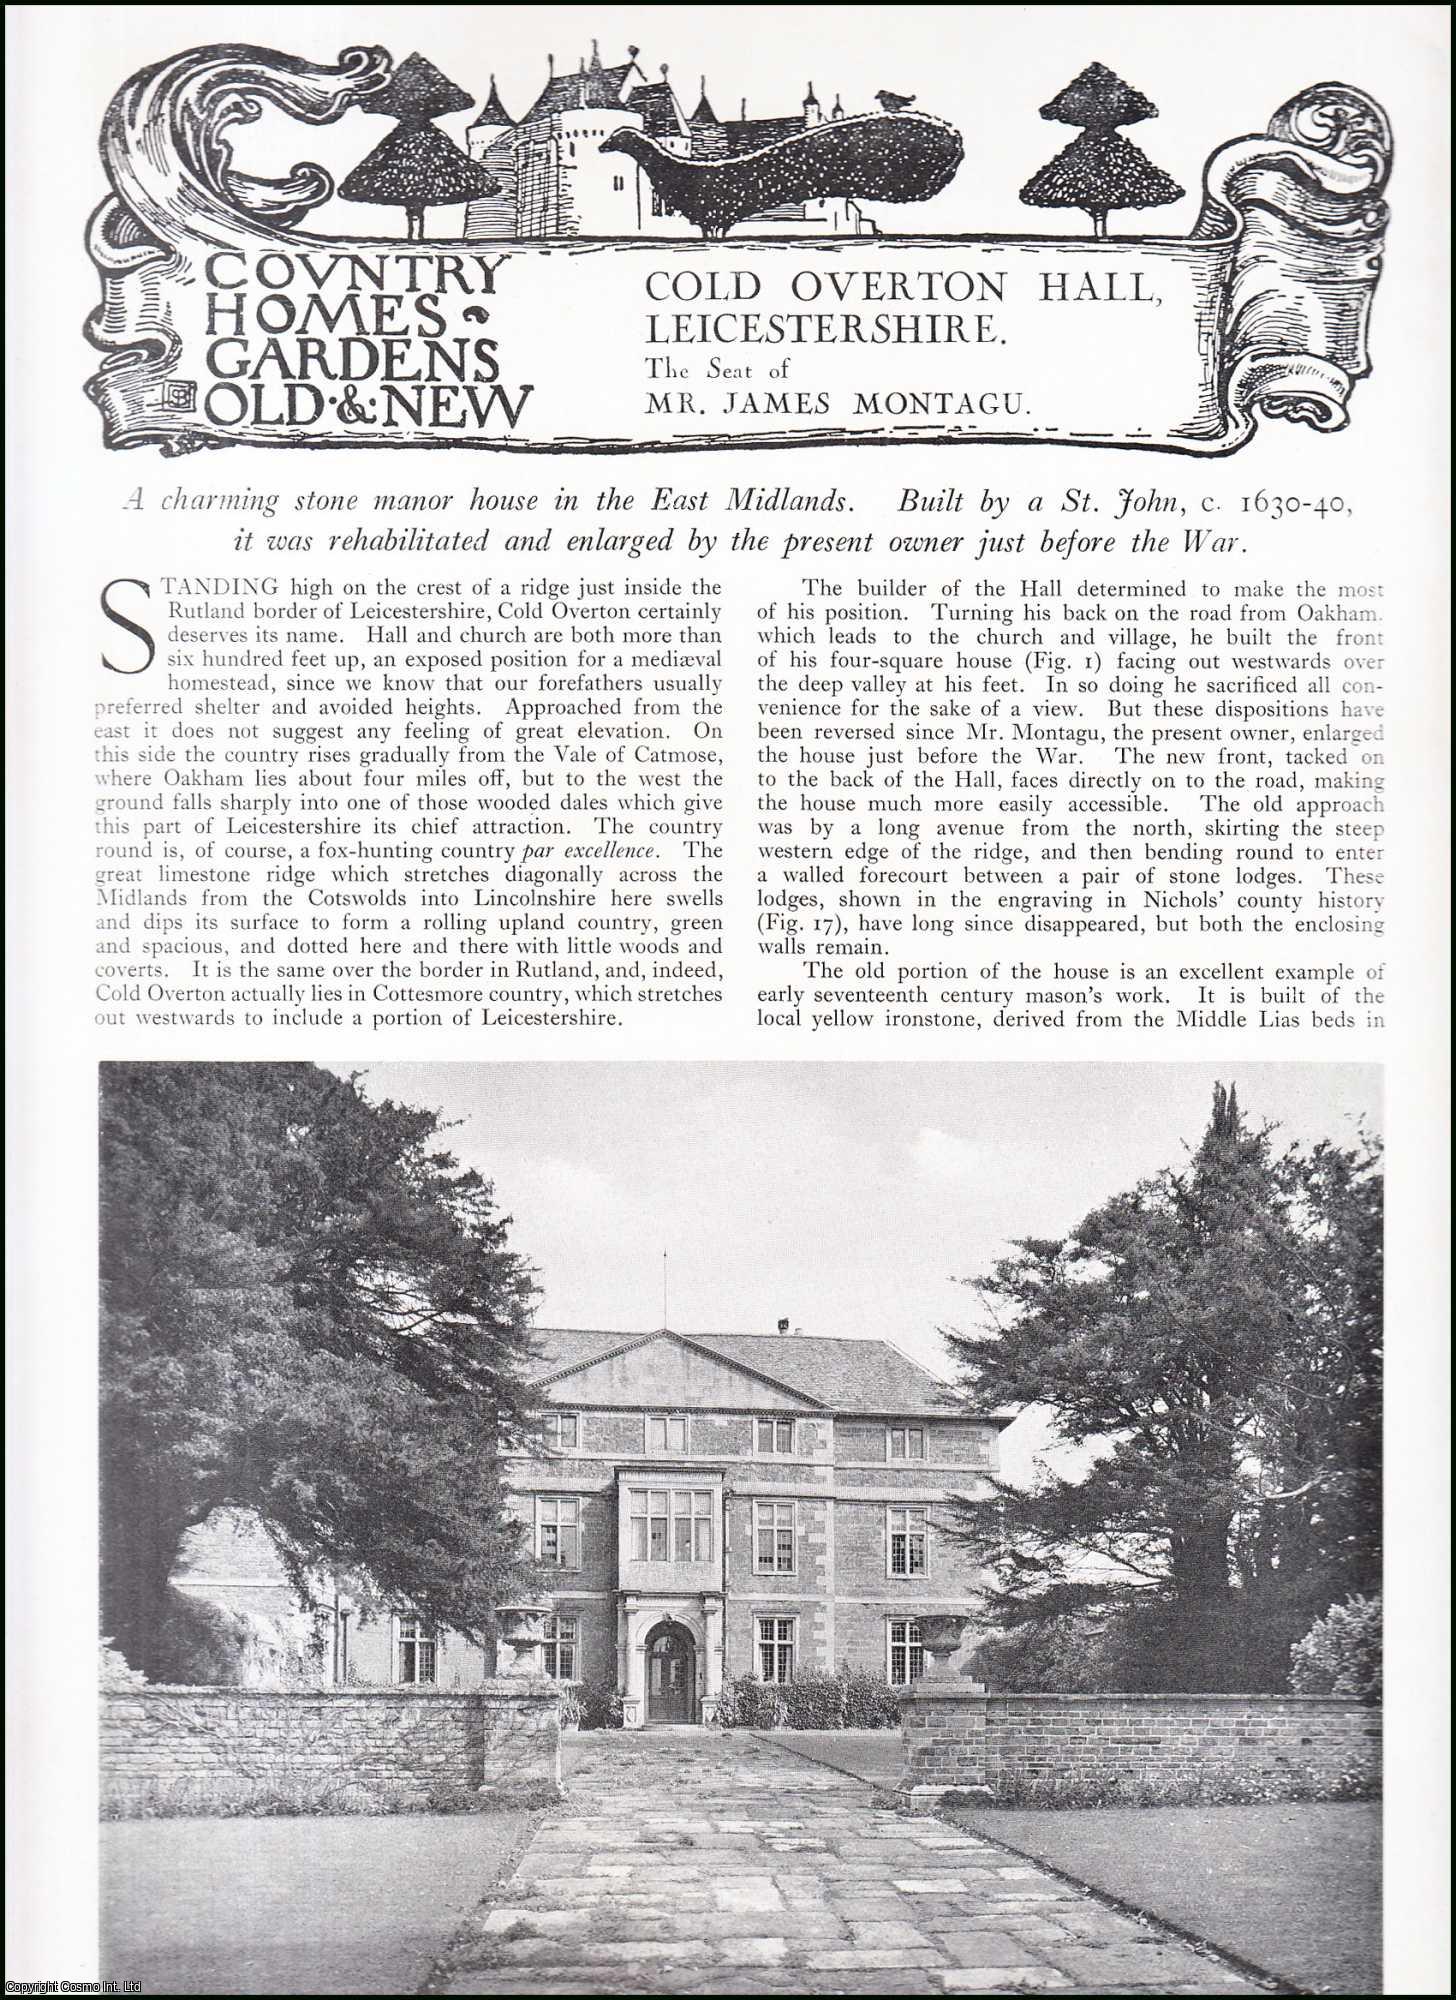 Country Life Magazine - Cold Overton Hall, Leicestershire. The Seat of Mr. James Montagu. Several pictures and accompanying text, removed from an original issue of Country Life Magazine, 1930.